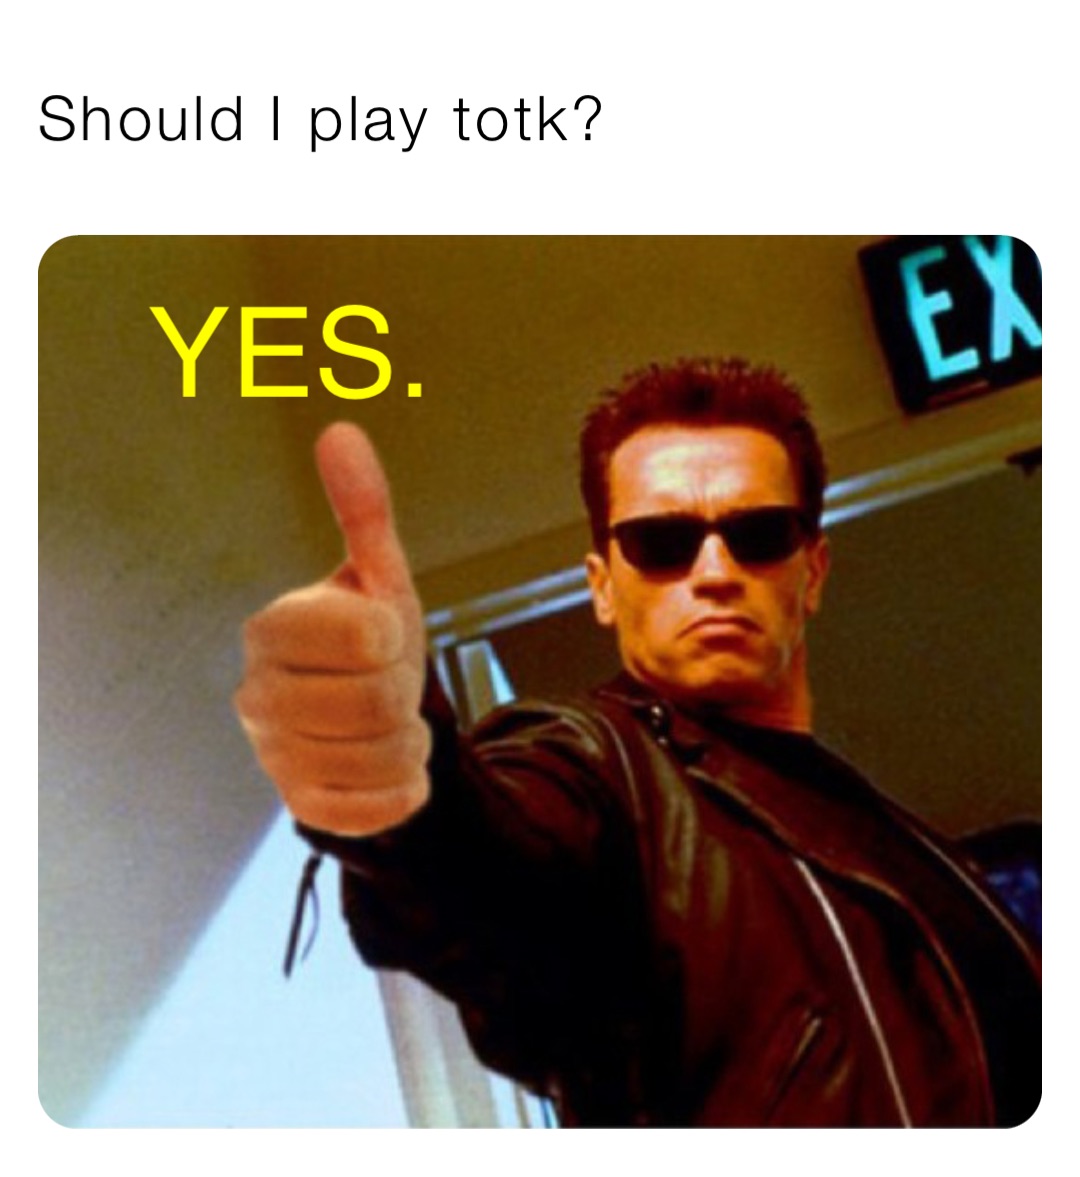 Should I play totk? YES.